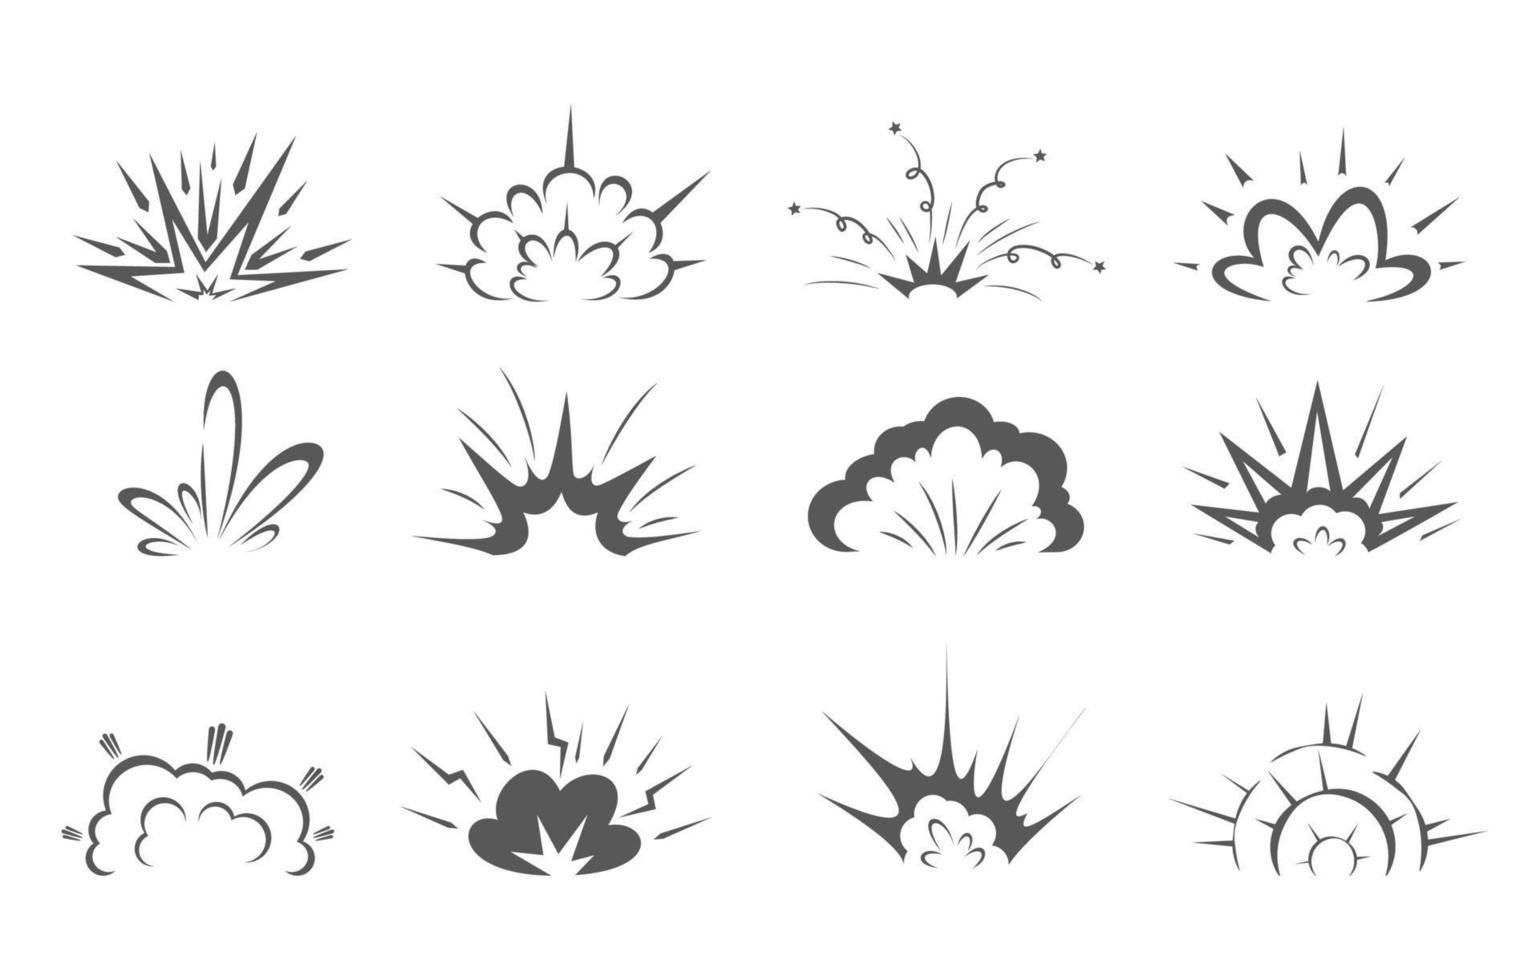 Cartoon bomb explosion, comic clouds silhouettes vector